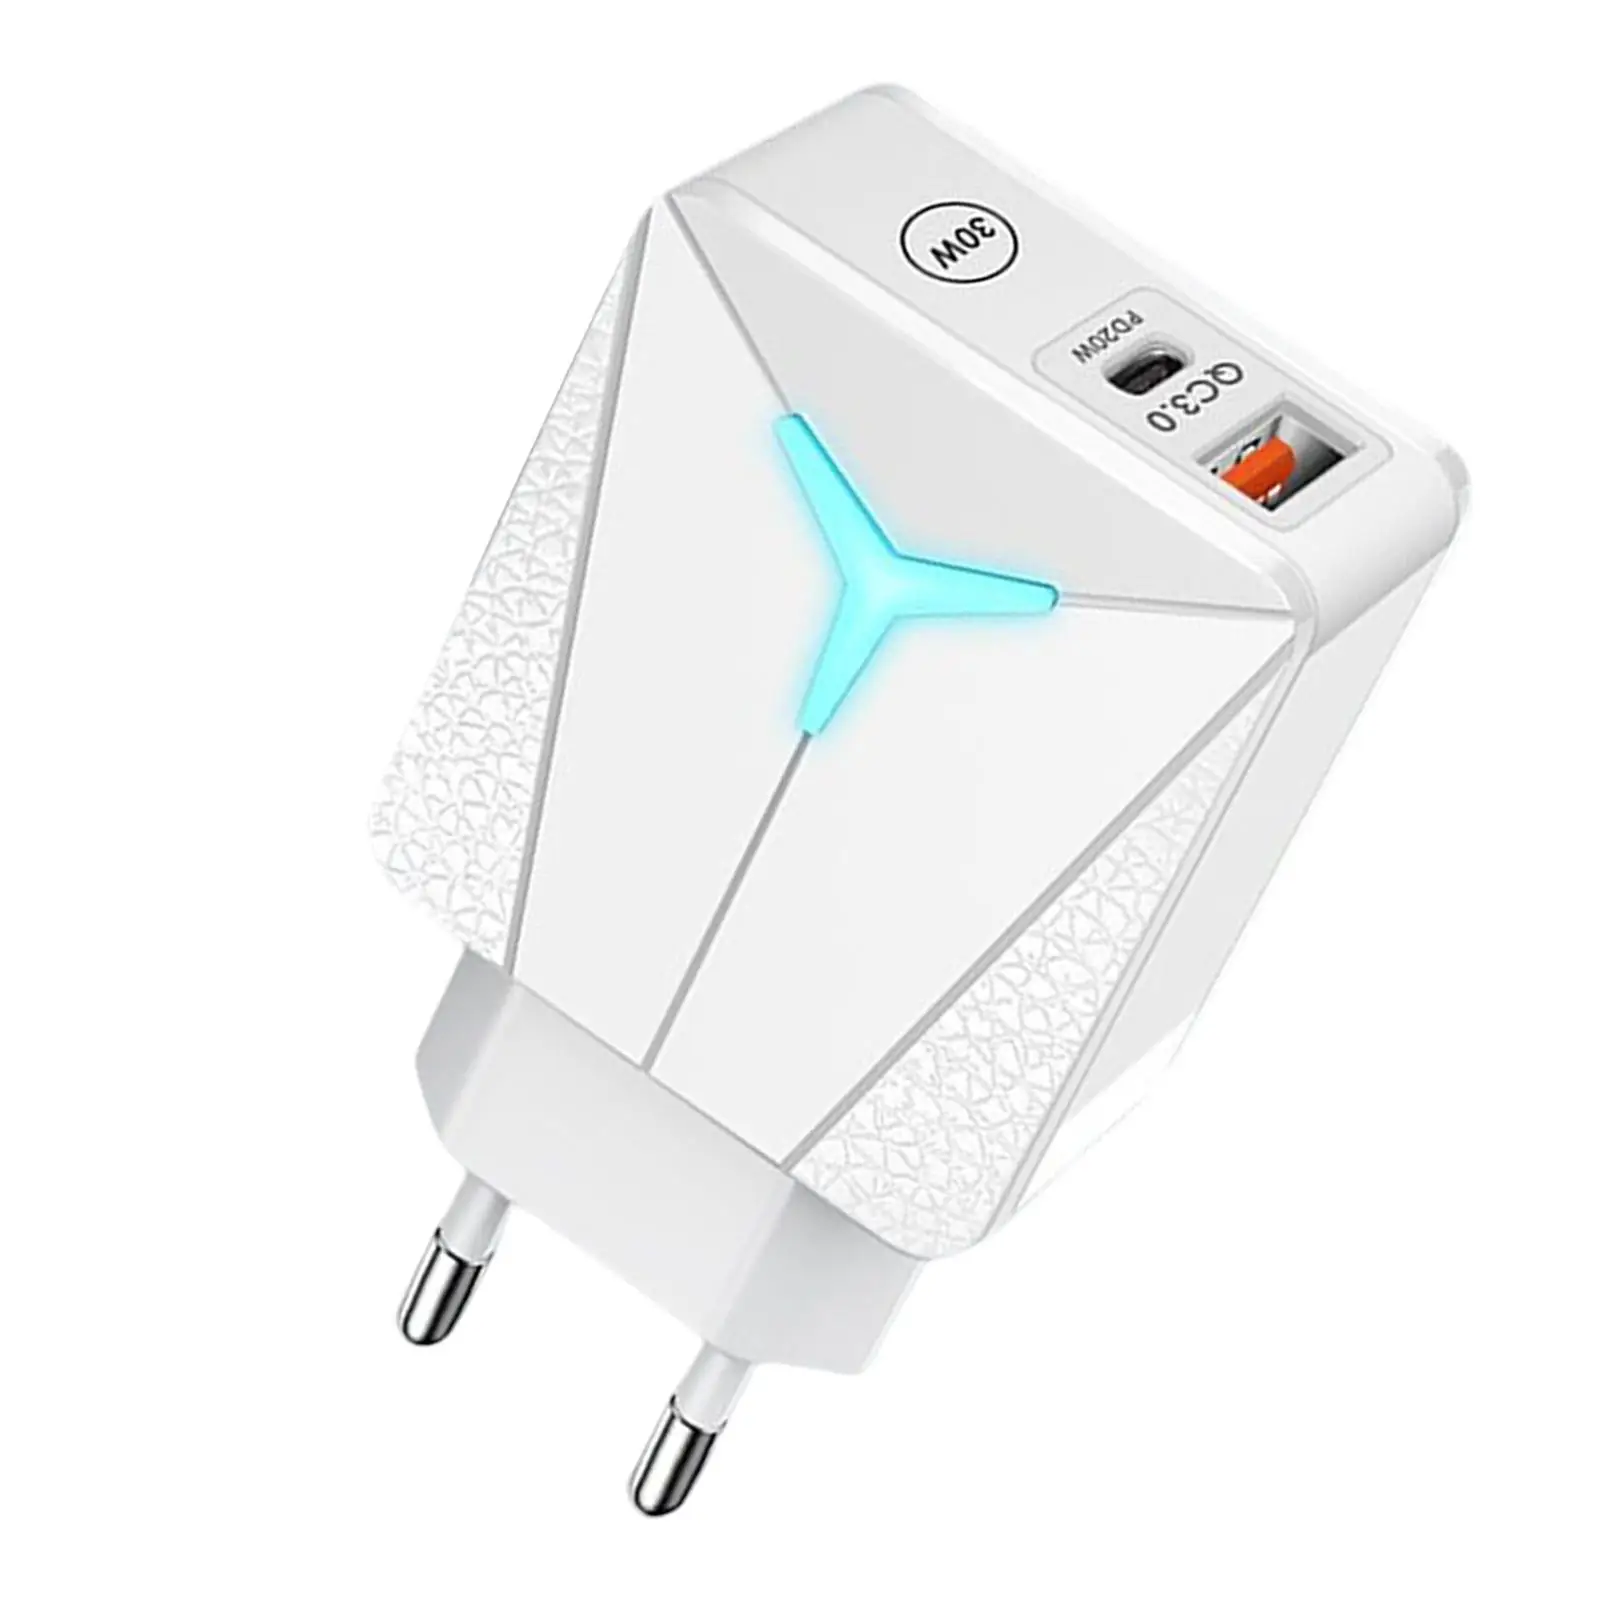 Phone Charger Adapter Compact Fast Charging Dual Port PD 20W QC3.0 Converter USB Wall Charger Charging Block for Home Use Travel